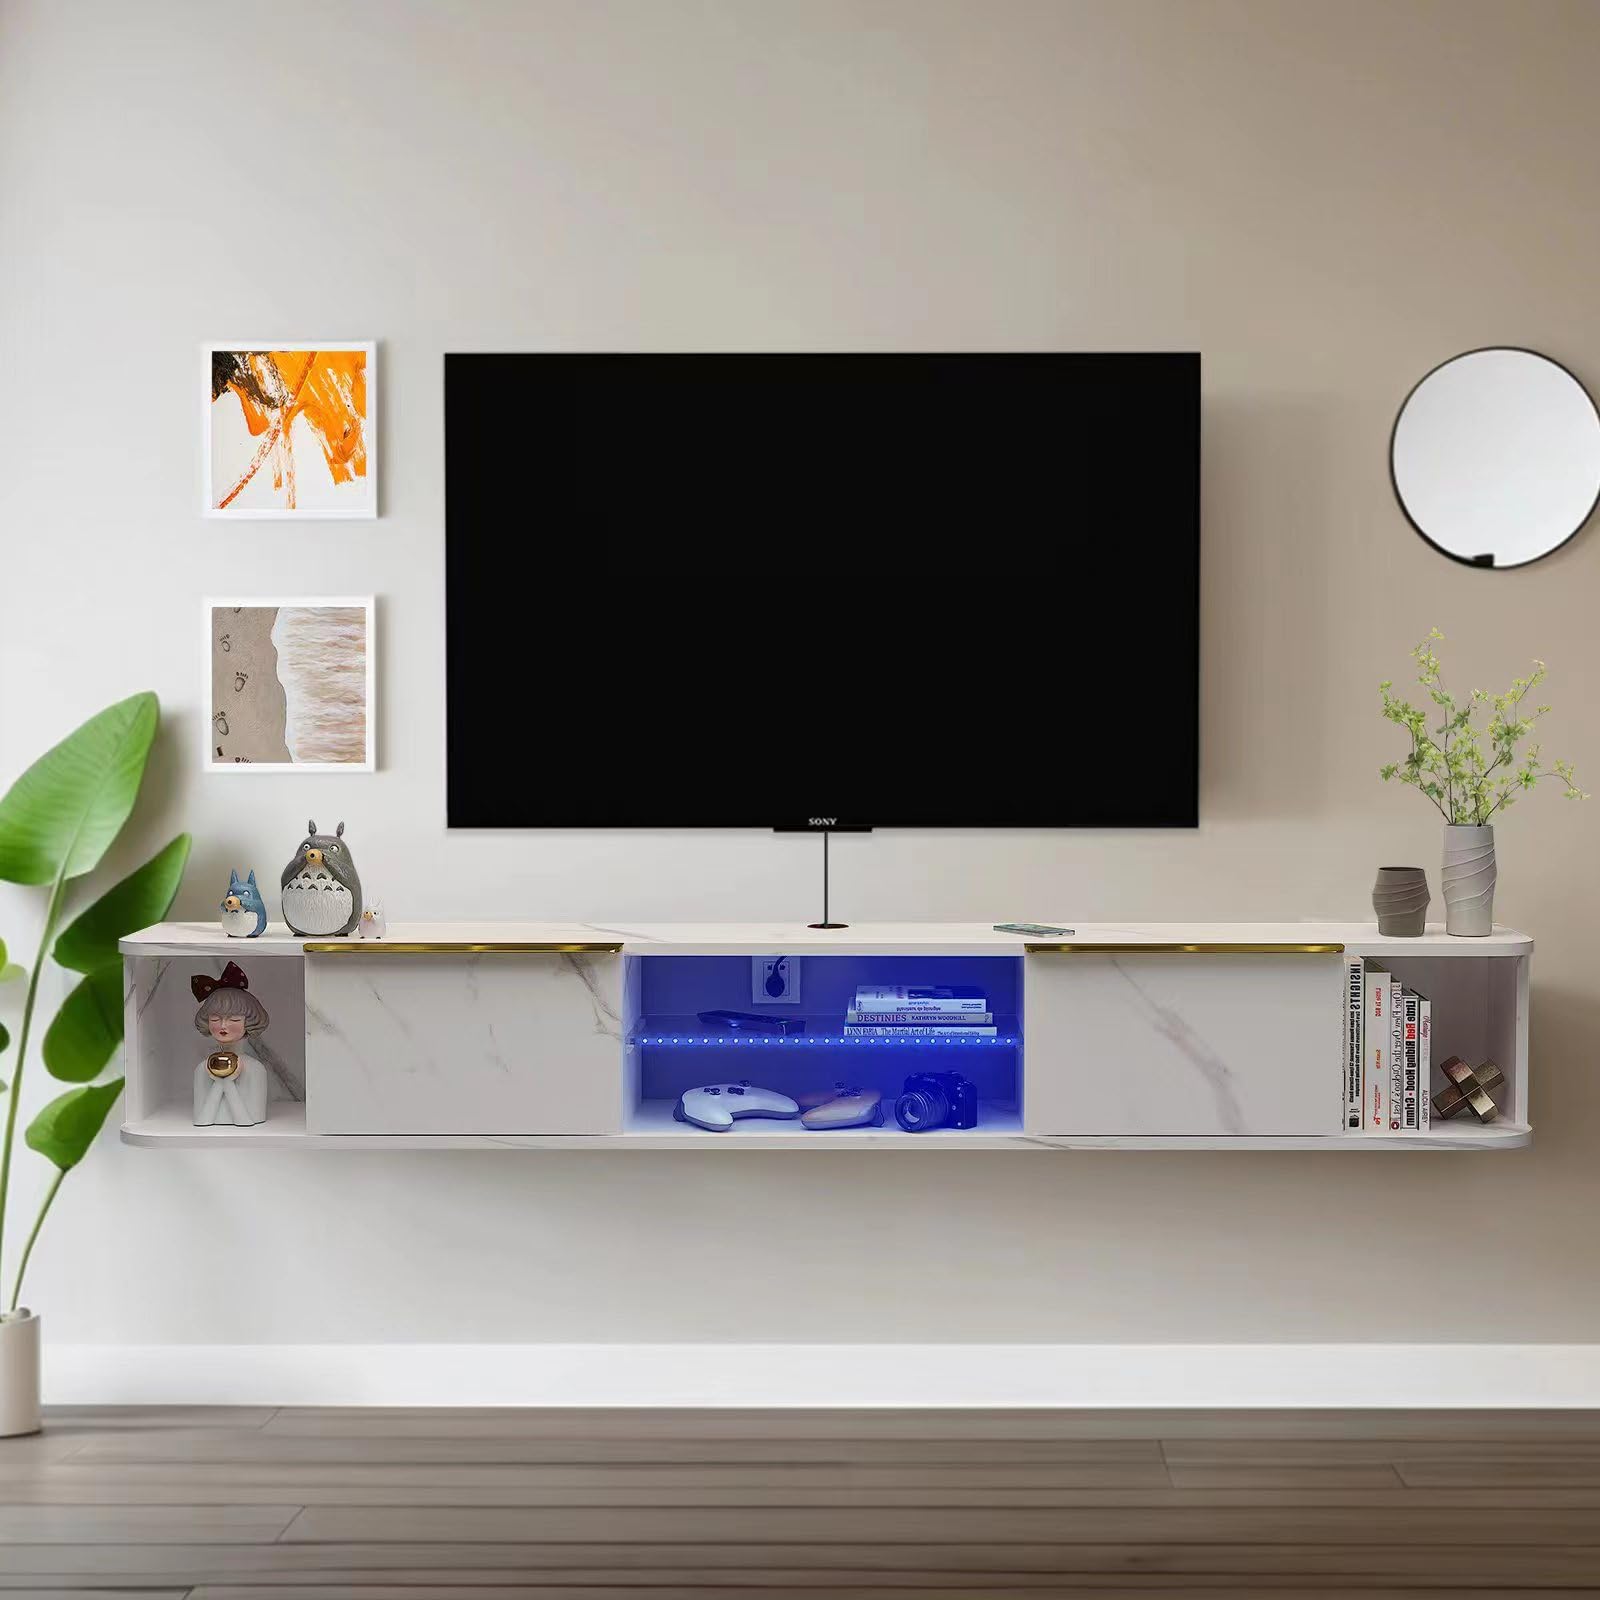 Custom Plywood Floating TV Stand Media Wall Shelf with LED Lights Media Console